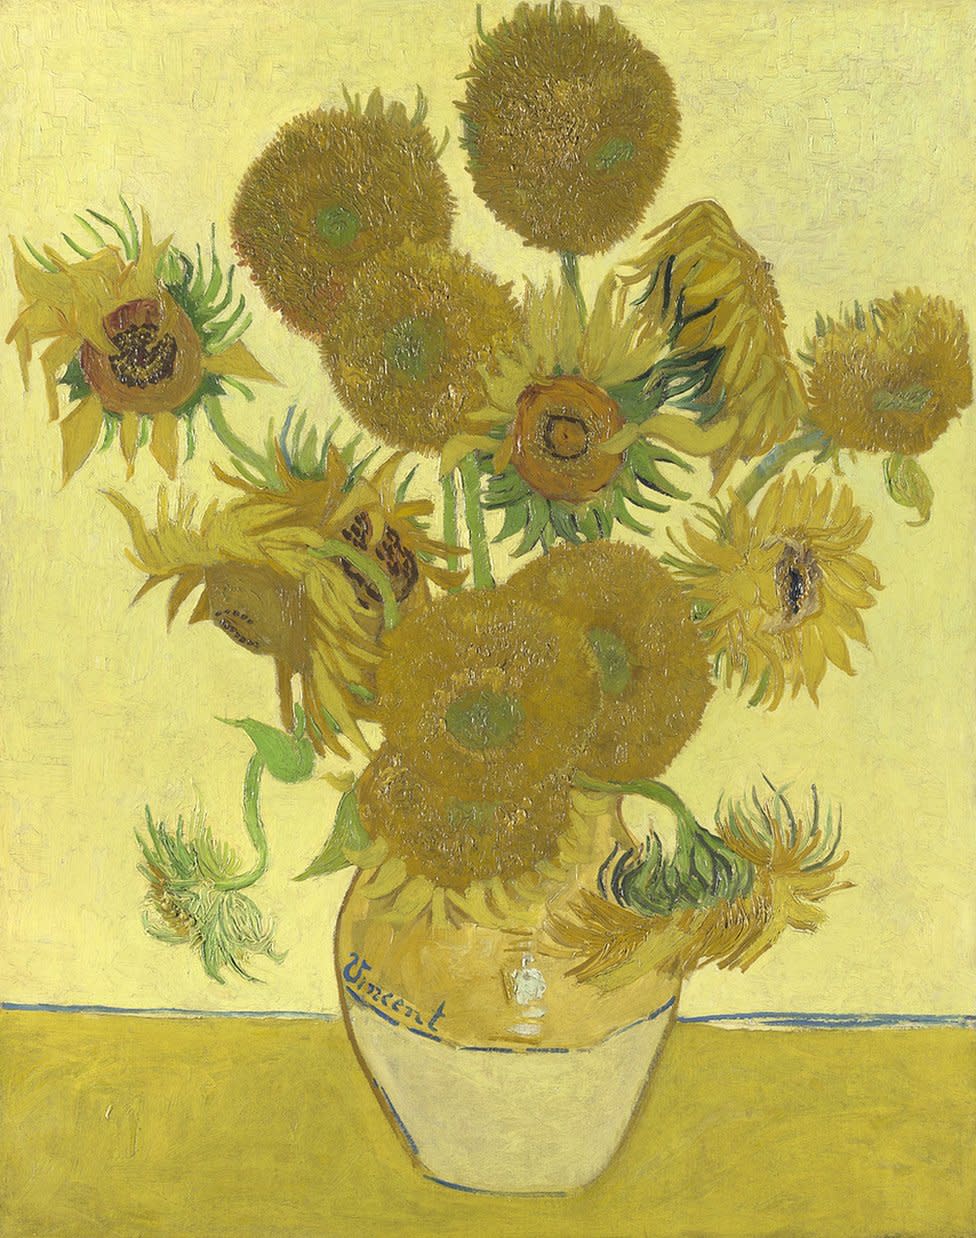 The National Gallery says it has exciting plans for one of its most popular and well-loved paintings, Van Gogh's Sunflowers (1888) as part of its celebrations